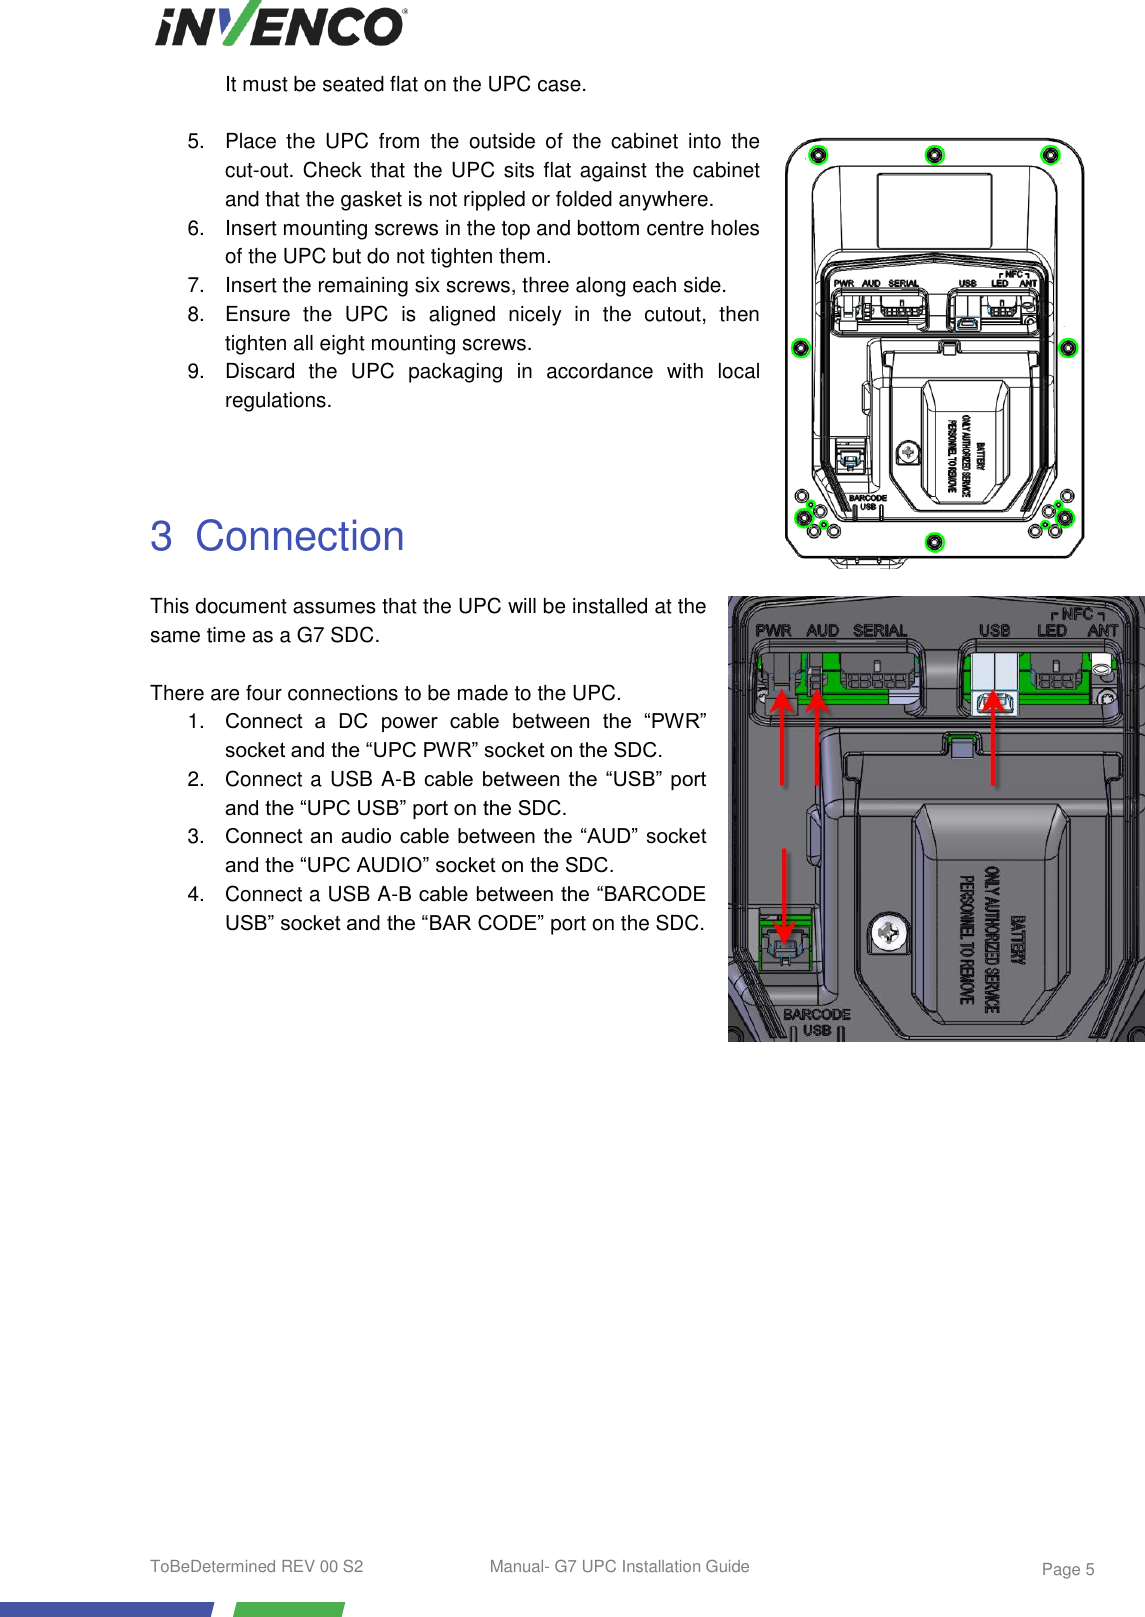  ToBeDetermined REV 00 S2  Manual- G7 UPC Installation Guide    Page 5 It must be seated flat on the UPC case.  5. Place  the  UPC  from  the  outside  of  the  cabinet  into  the cut-out. Check that the UPC sits flat against the cabinet and that the gasket is not rippled or folded anywhere. 6.  Insert mounting screws in the top and bottom centre holes of the UPC but do not tighten them. 7.  Insert the remaining six screws, three along each side. 8.  Ensure  the  UPC  is  aligned  nicely  in  the  cutout,  then tighten all eight mounting screws. 9.  Discard  the  UPC  packaging  in  accordance  with  local regulations.   3  Connection This document assumes that the UPC will be installed at the same time as a G7 SDC.  There are four connections to be made to the UPC. 1. Connect  a  DC  power  cable  between  the  “PWR” socket and the “UPC PWR” socket on the SDC. 2.  Connect a USB A-B cable  between the “USB”  port and the “UPC USB” port on the SDC. 3. Connect an audio cable between the “AUD” socket and the “UPC AUDIO” socket on the SDC. 4.  Connect a USB A-B cable between the “BARCODE USB” socket and the “BAR CODE” port on the SDC.     